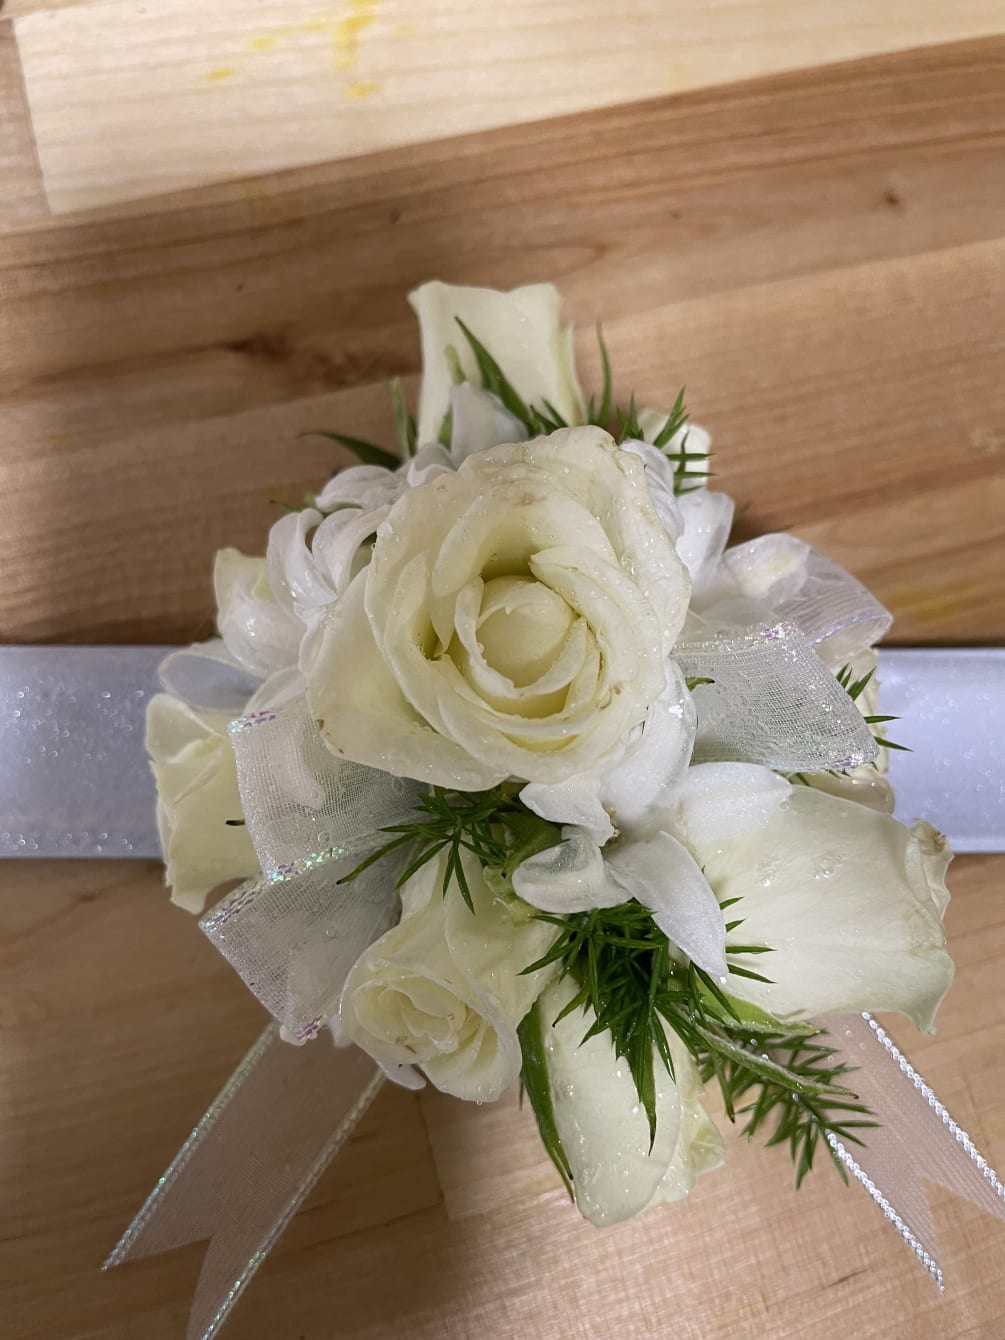 A white corsage for prom and weddings! Corsage colors and ribbon can